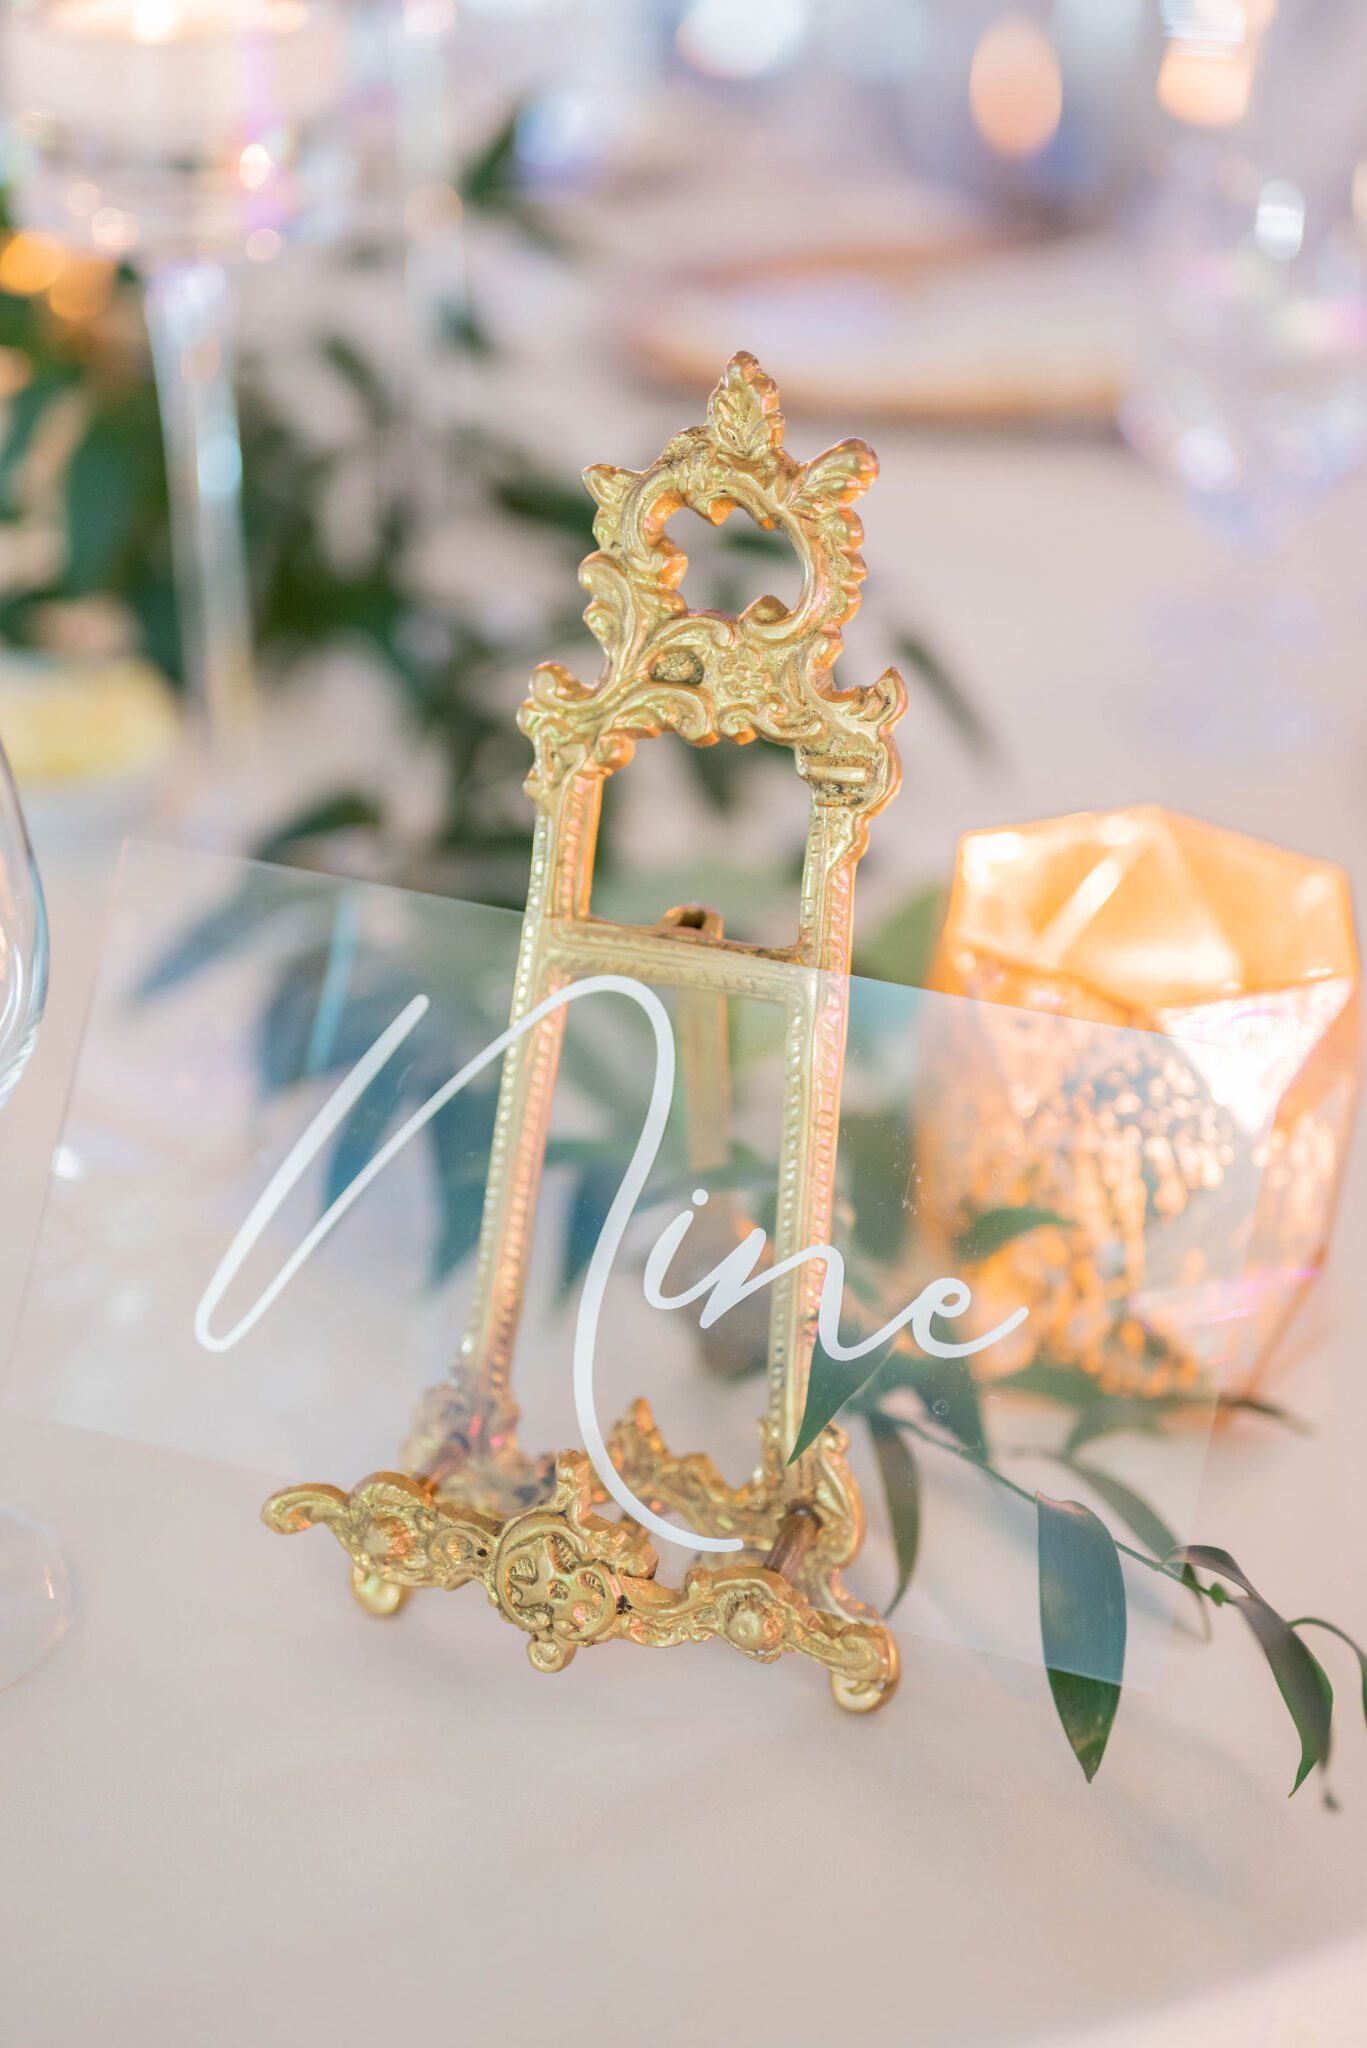 Hand-painted table numbers with gold detailed stand, surrounded by greenery, white linens, and gold candle holders, classic wedding tablescape inspiration